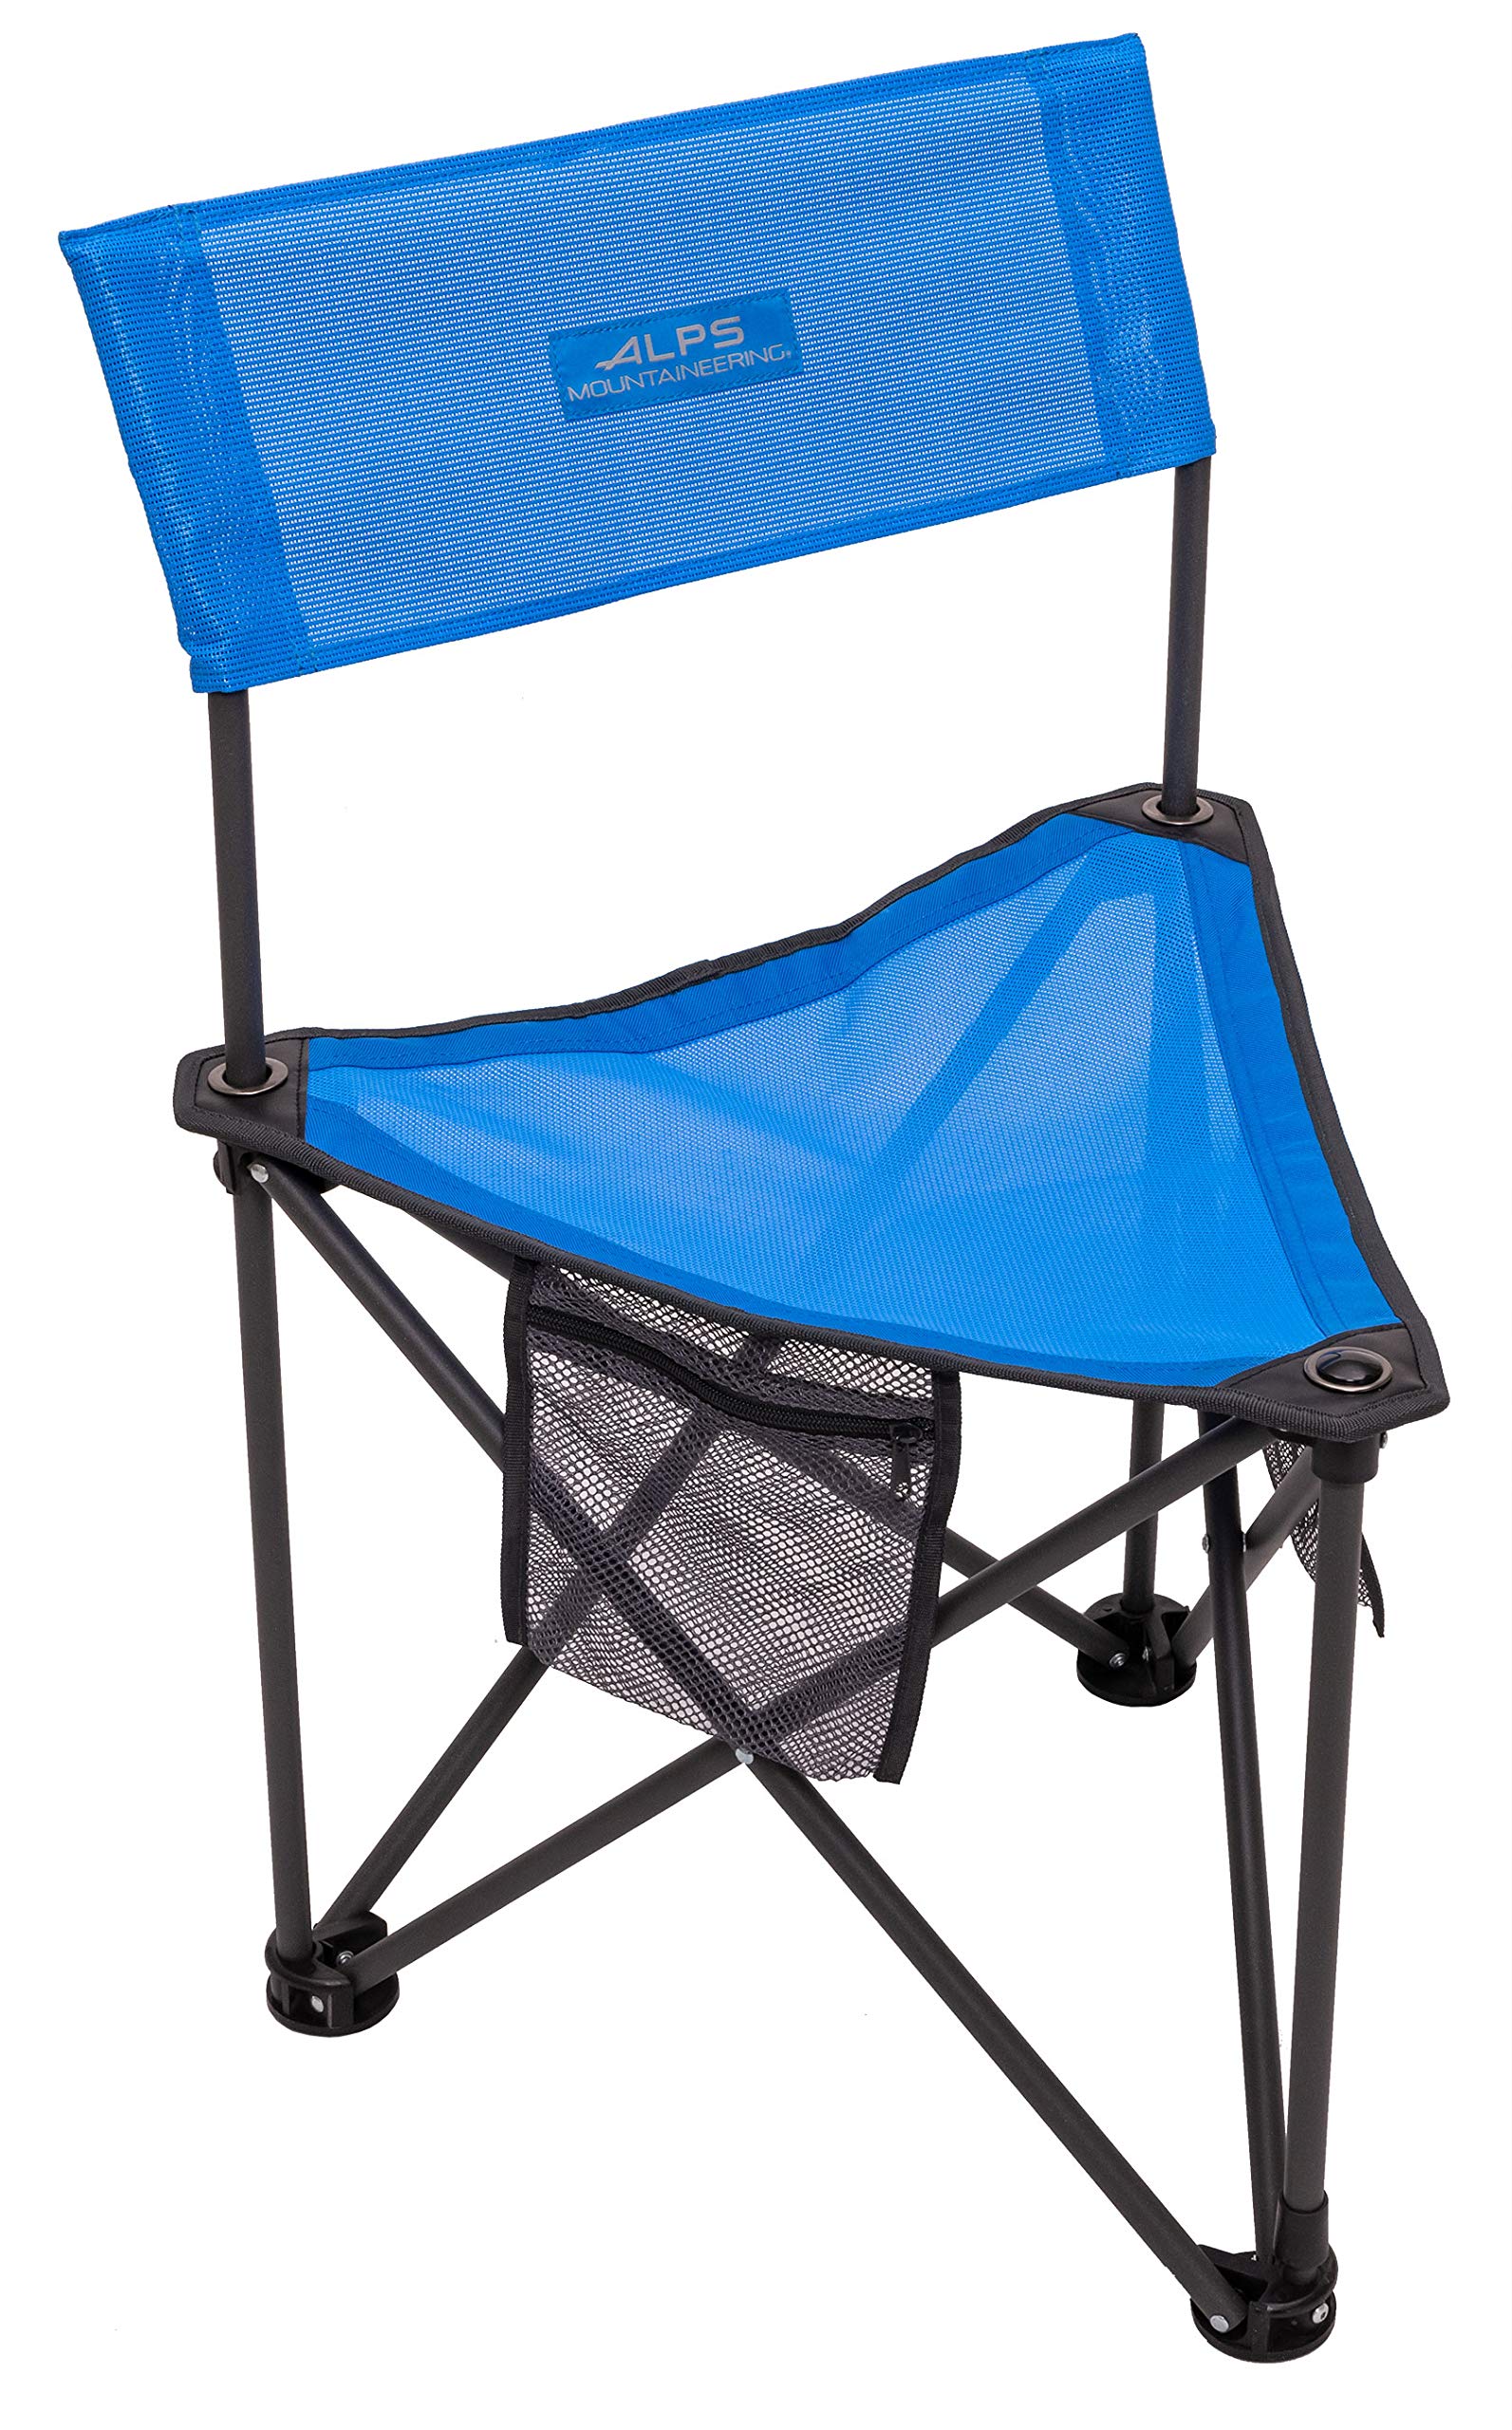 ALPS Mountaineering Grand Rapids Camping Chair One Size Blue並行輸入品